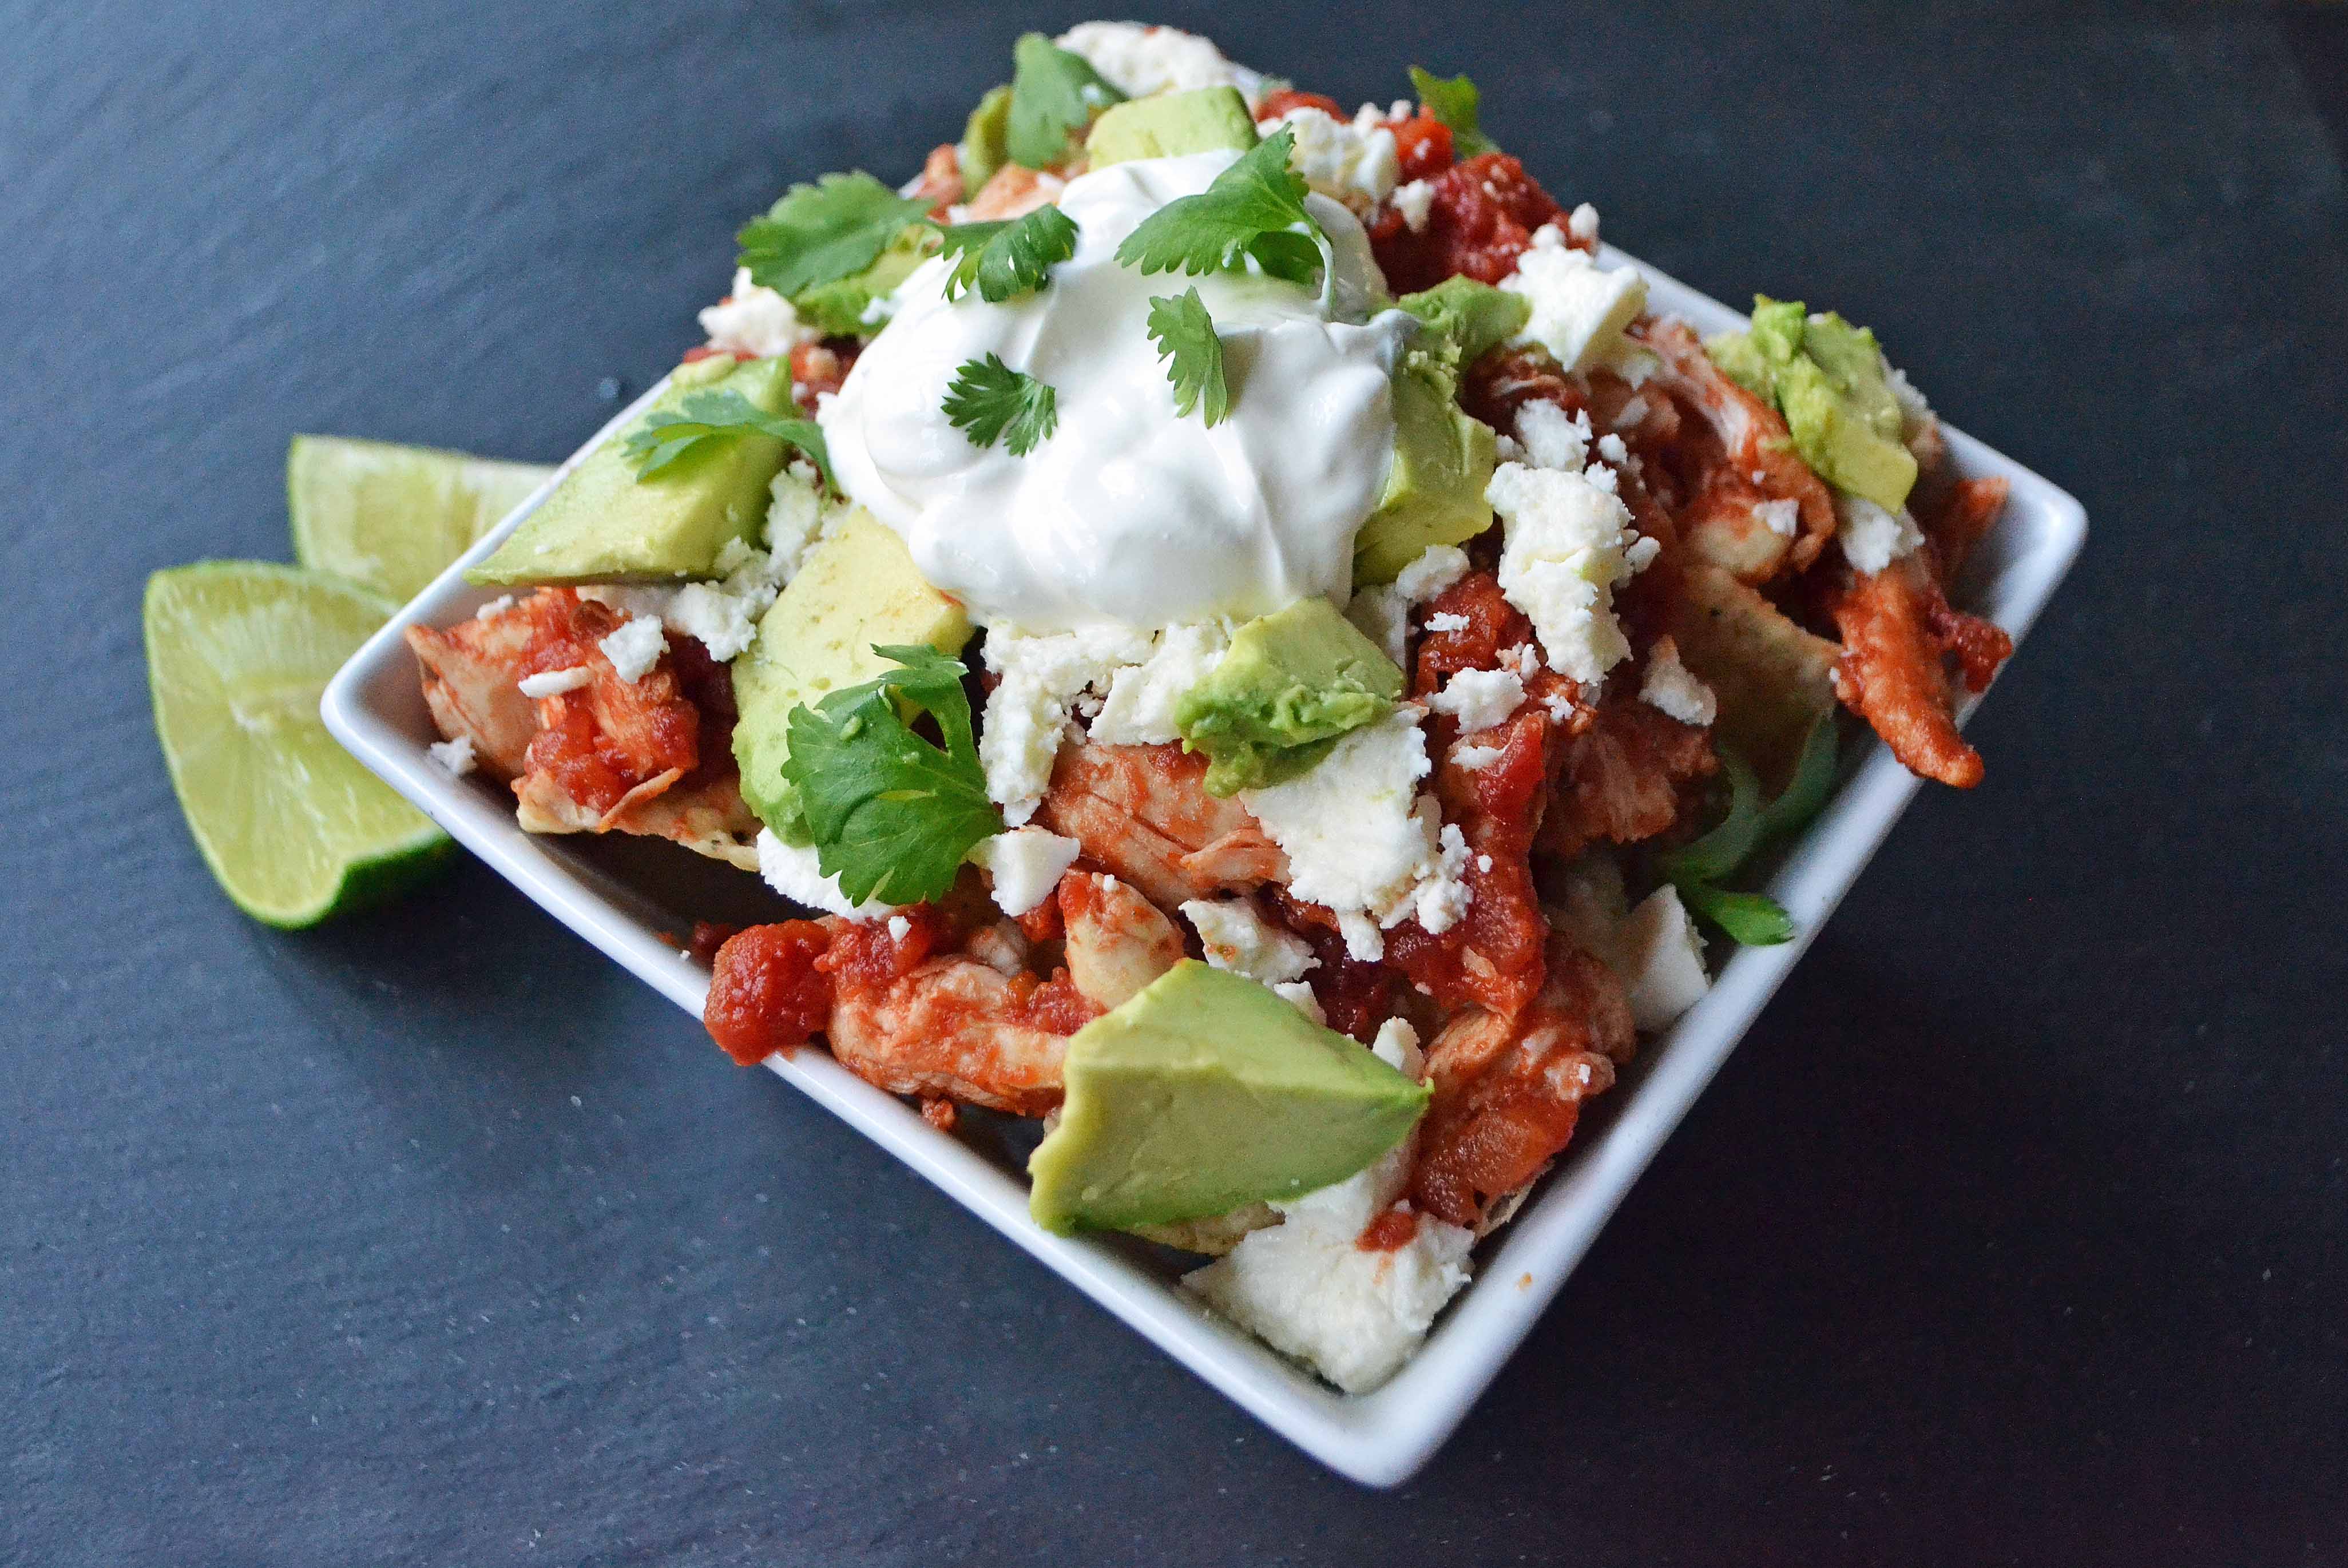 Easy Chicken Chilaquiles. Gluten-Free and made in 30 minutes or less. www.modernhoney.com